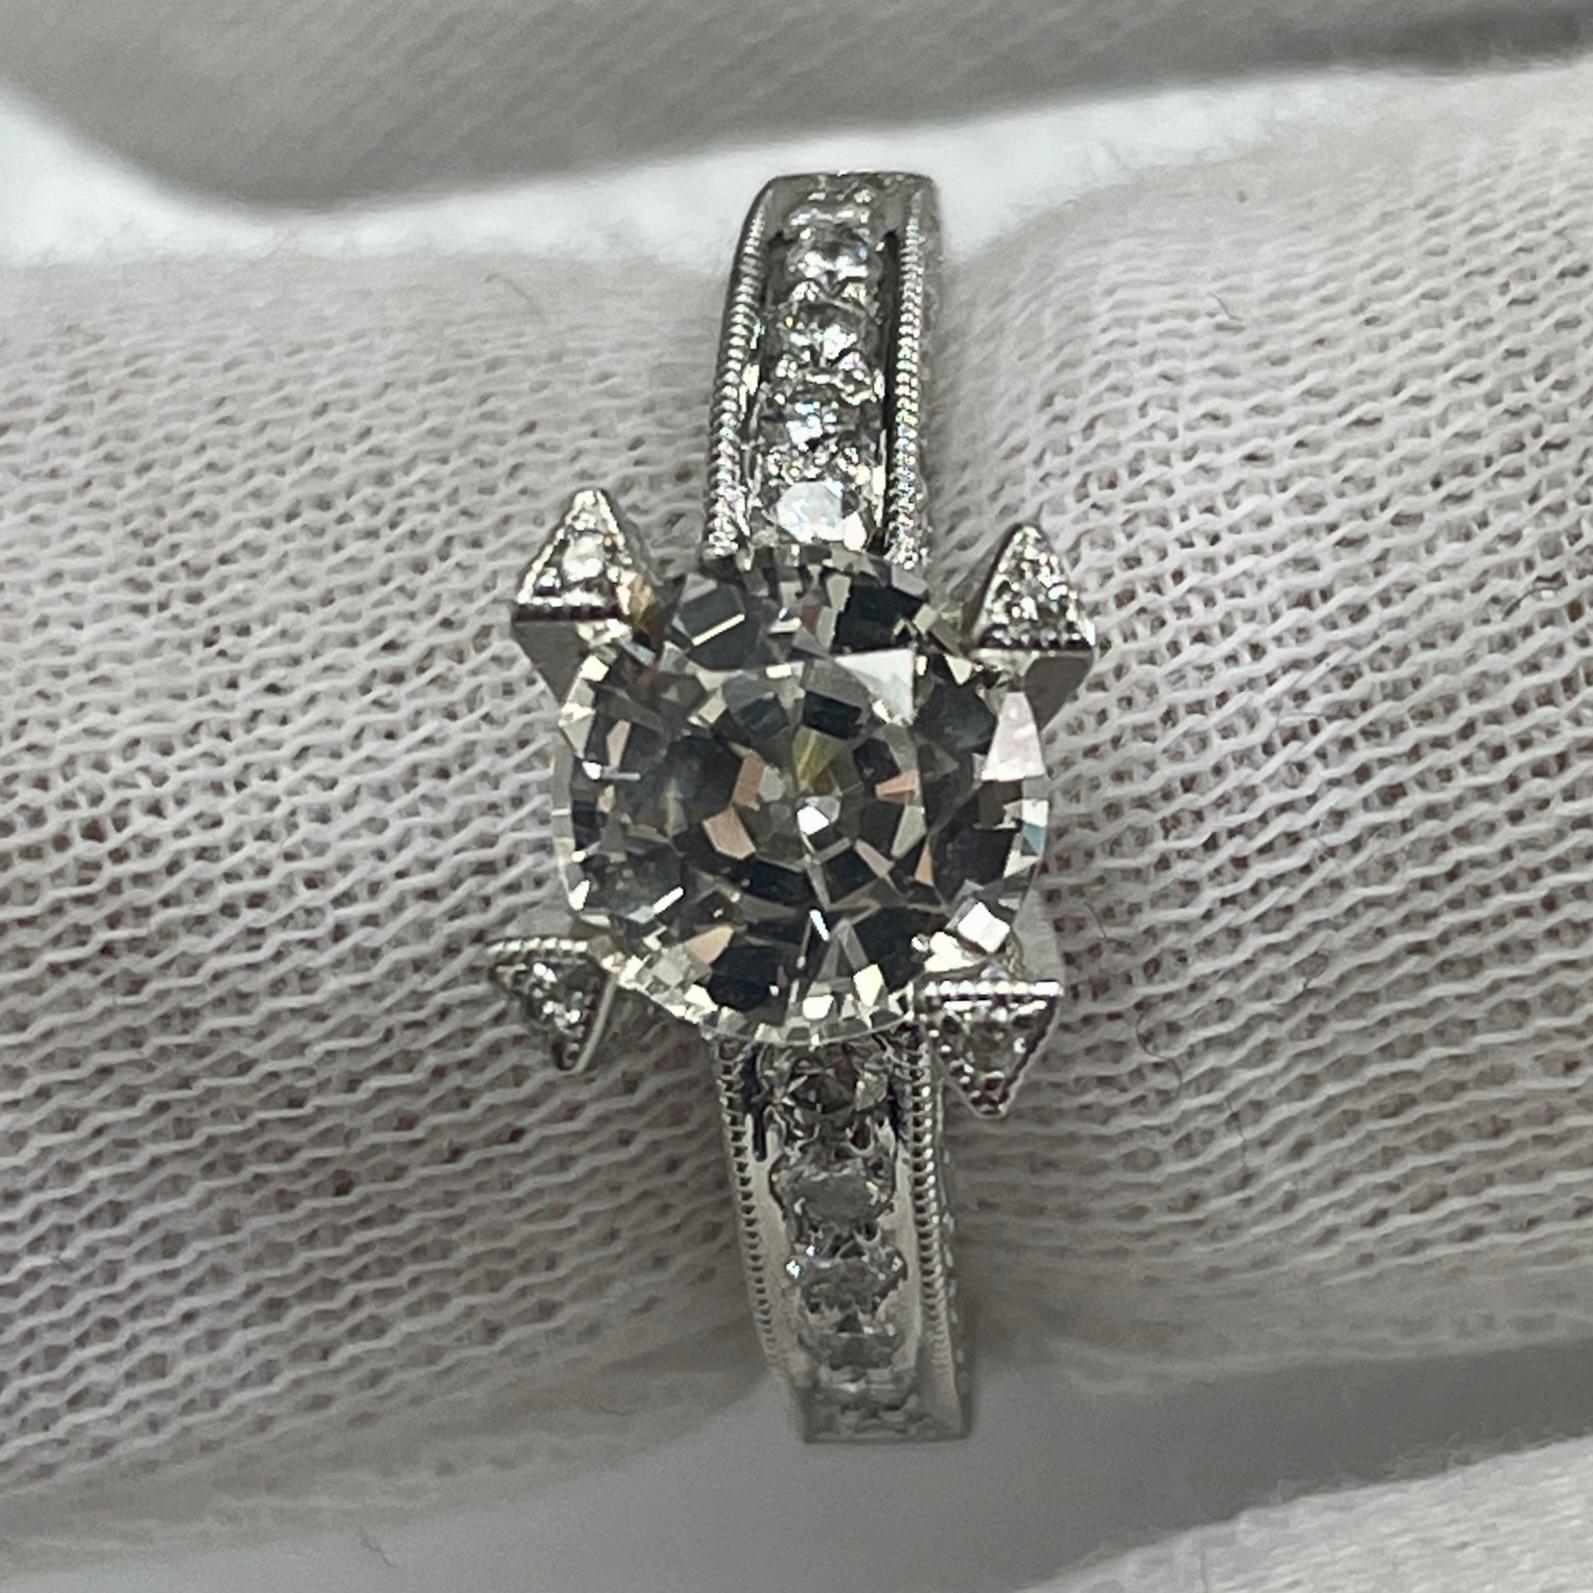 This ring has a beautiful white sapphire. This holds 14K white gold and 0.64 carats of brilliant white diamonds.